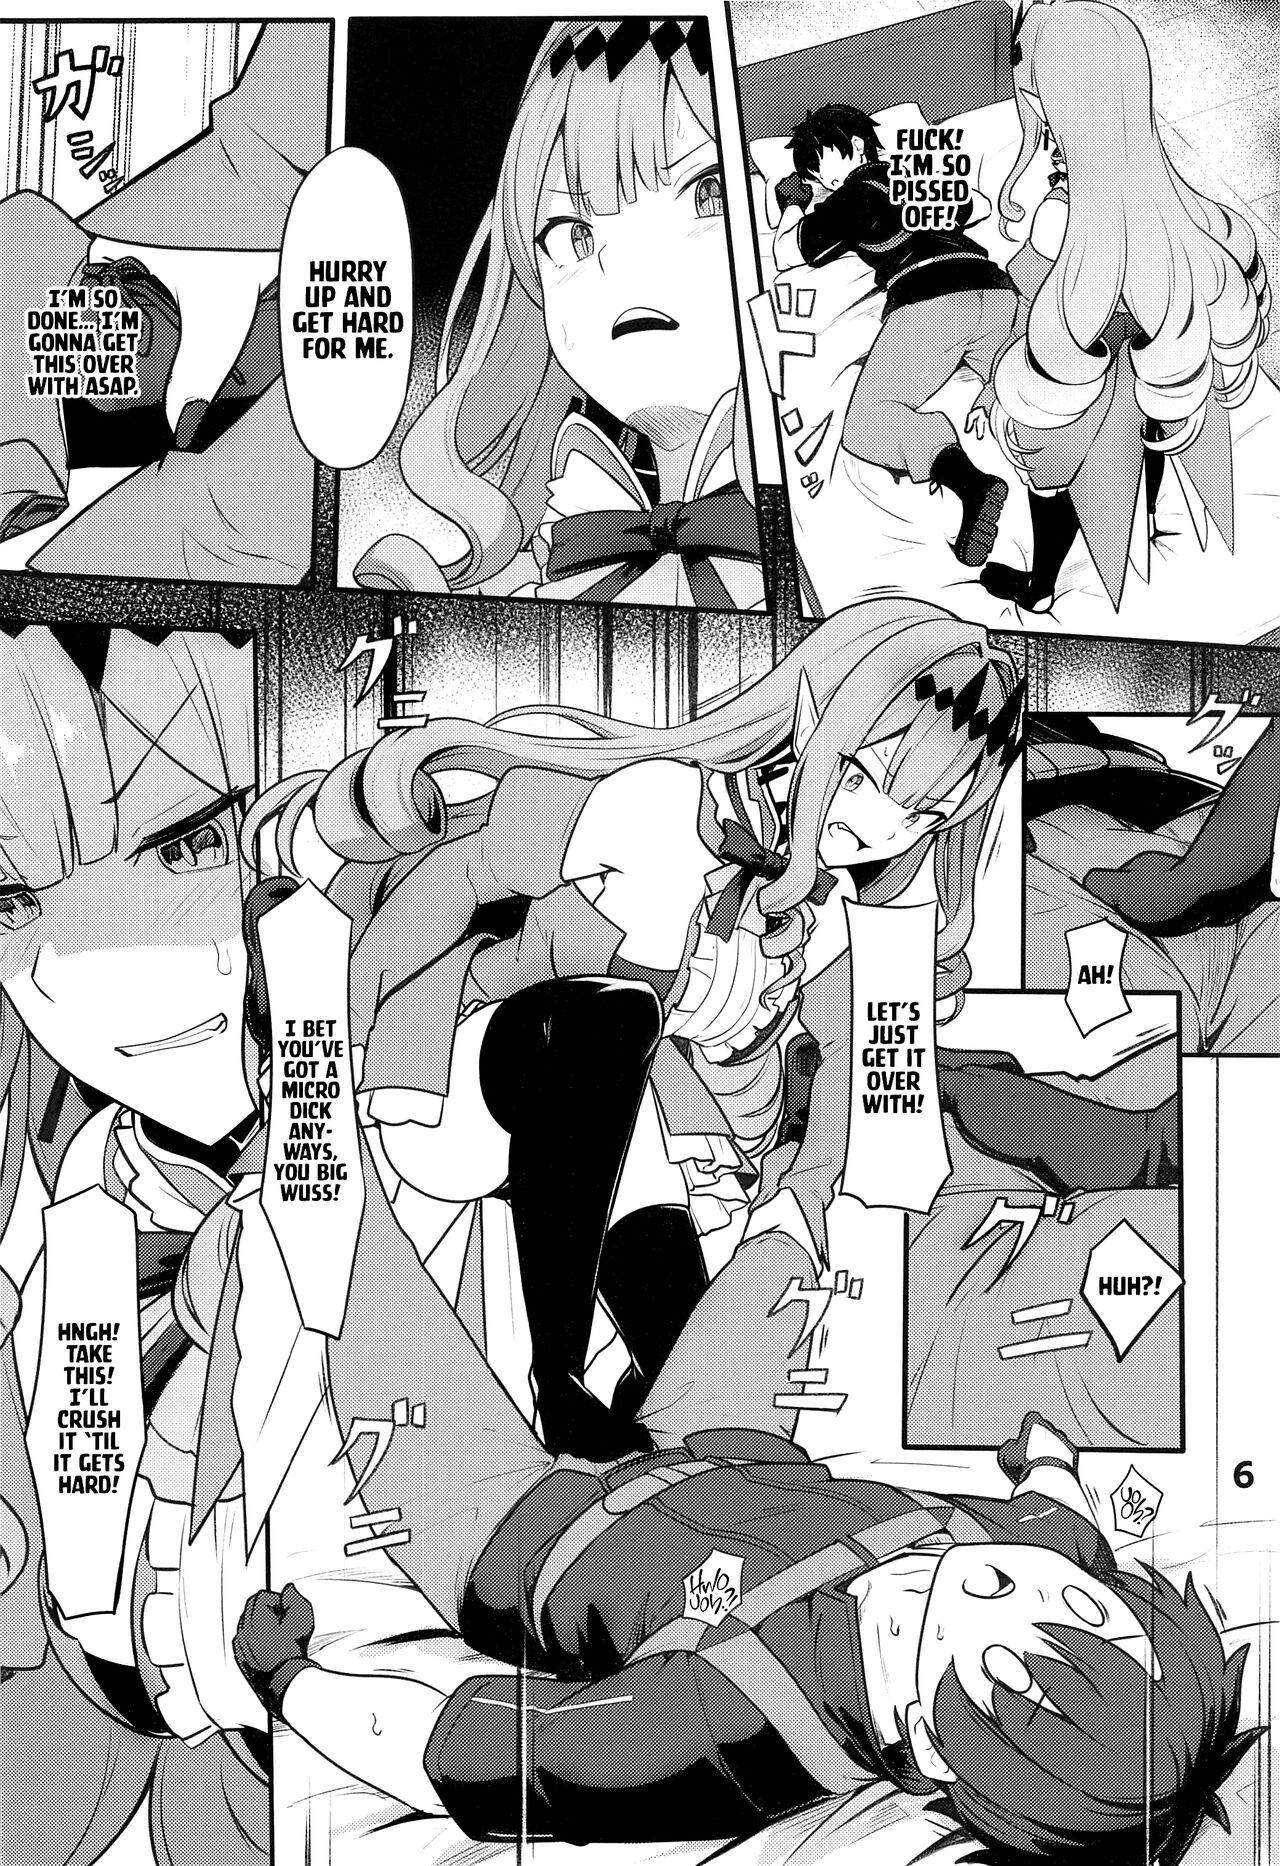 Pinoy Baobhan Sith to SEX Shinai to Derarenai Heya | Baobhan Sith and I Need to Have Sex or Else We Can't Leave This Room! - Fate grand order Women Sucking - Page 7